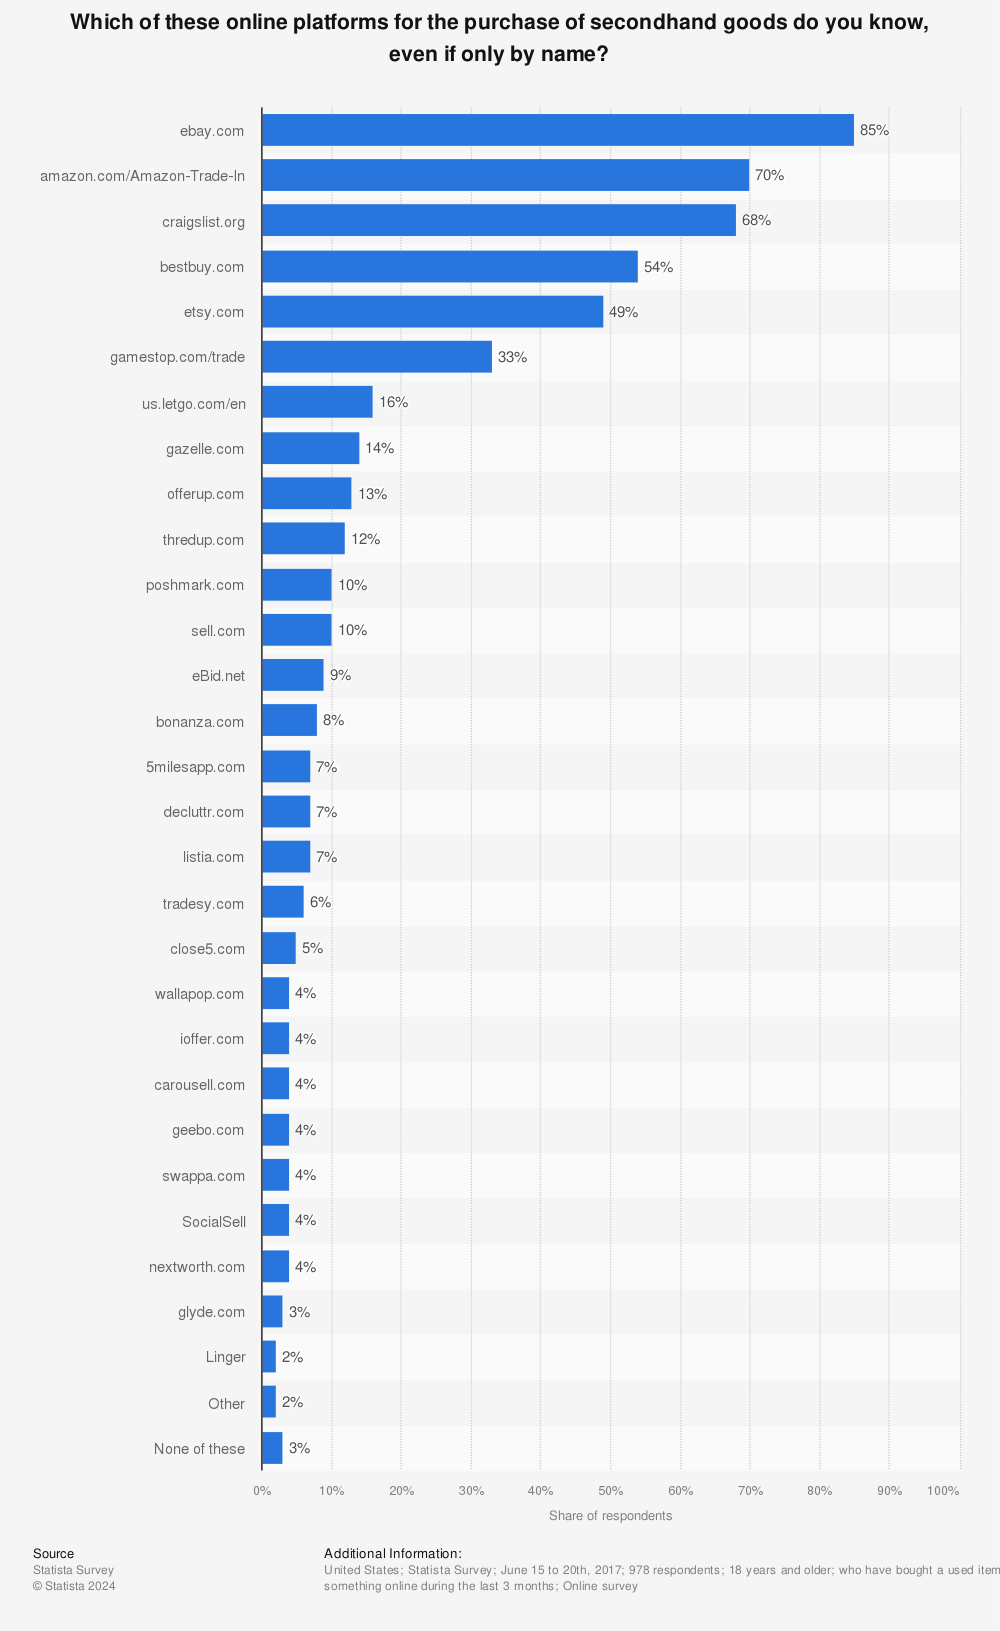 Statistic: Which of these online platforms for the purchase of secondhand goods do you know, even if only by name? | Statista